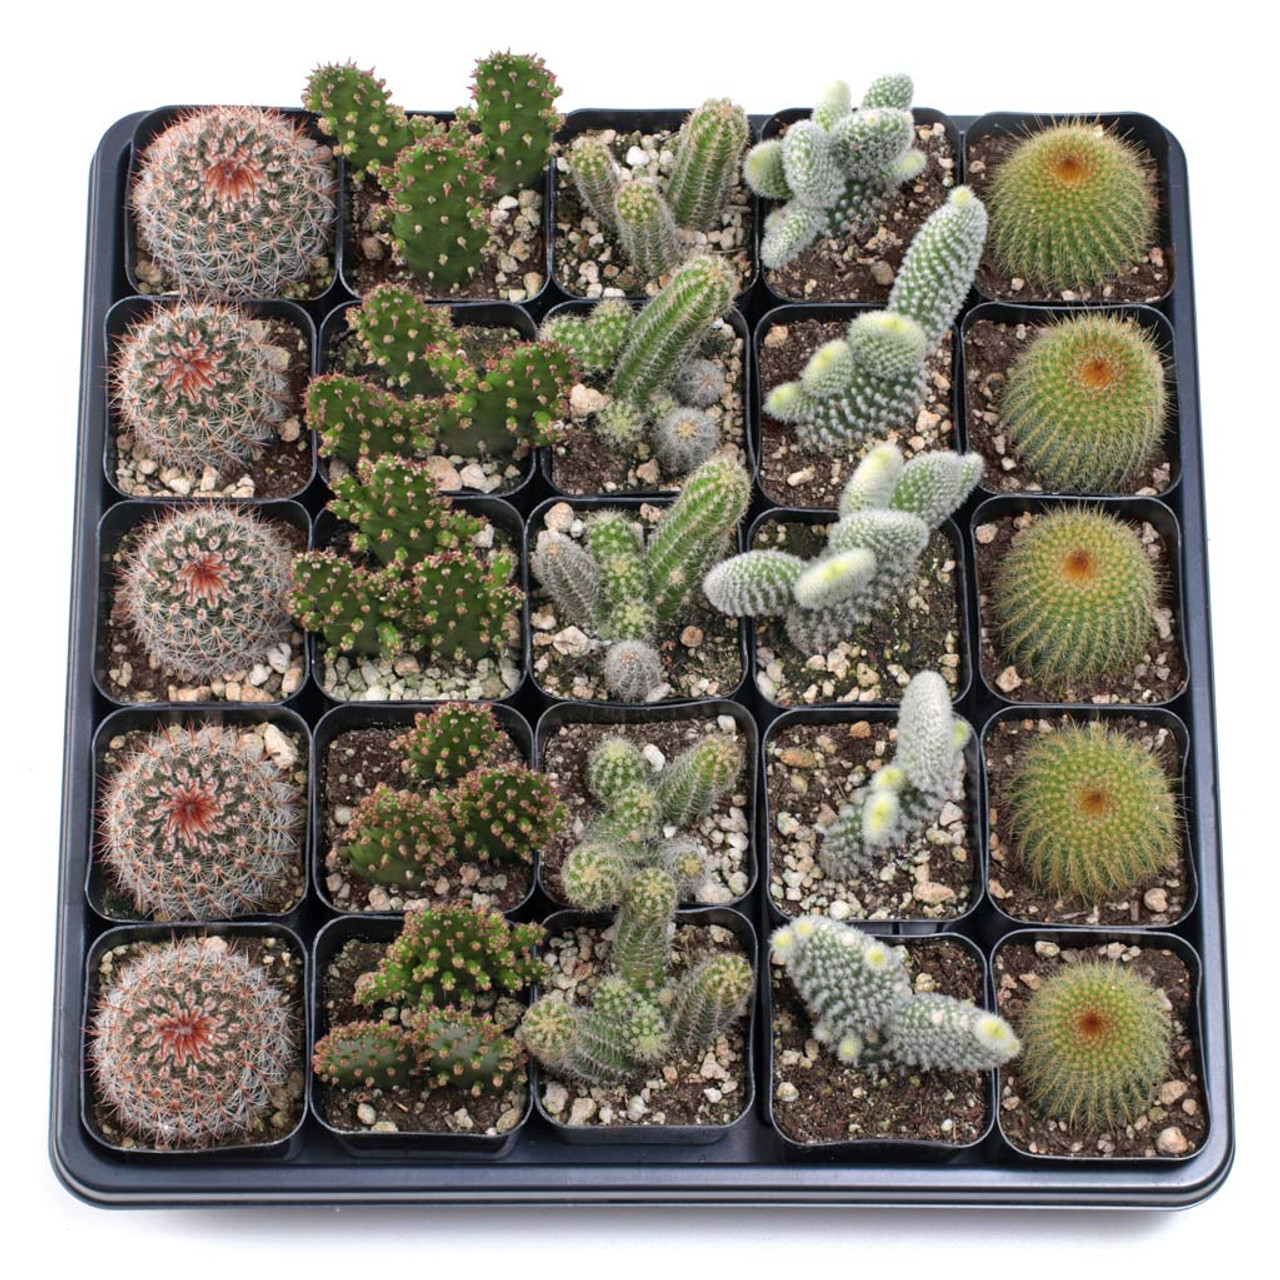 5 Gorgeous Cacti To Put On Your Desk 